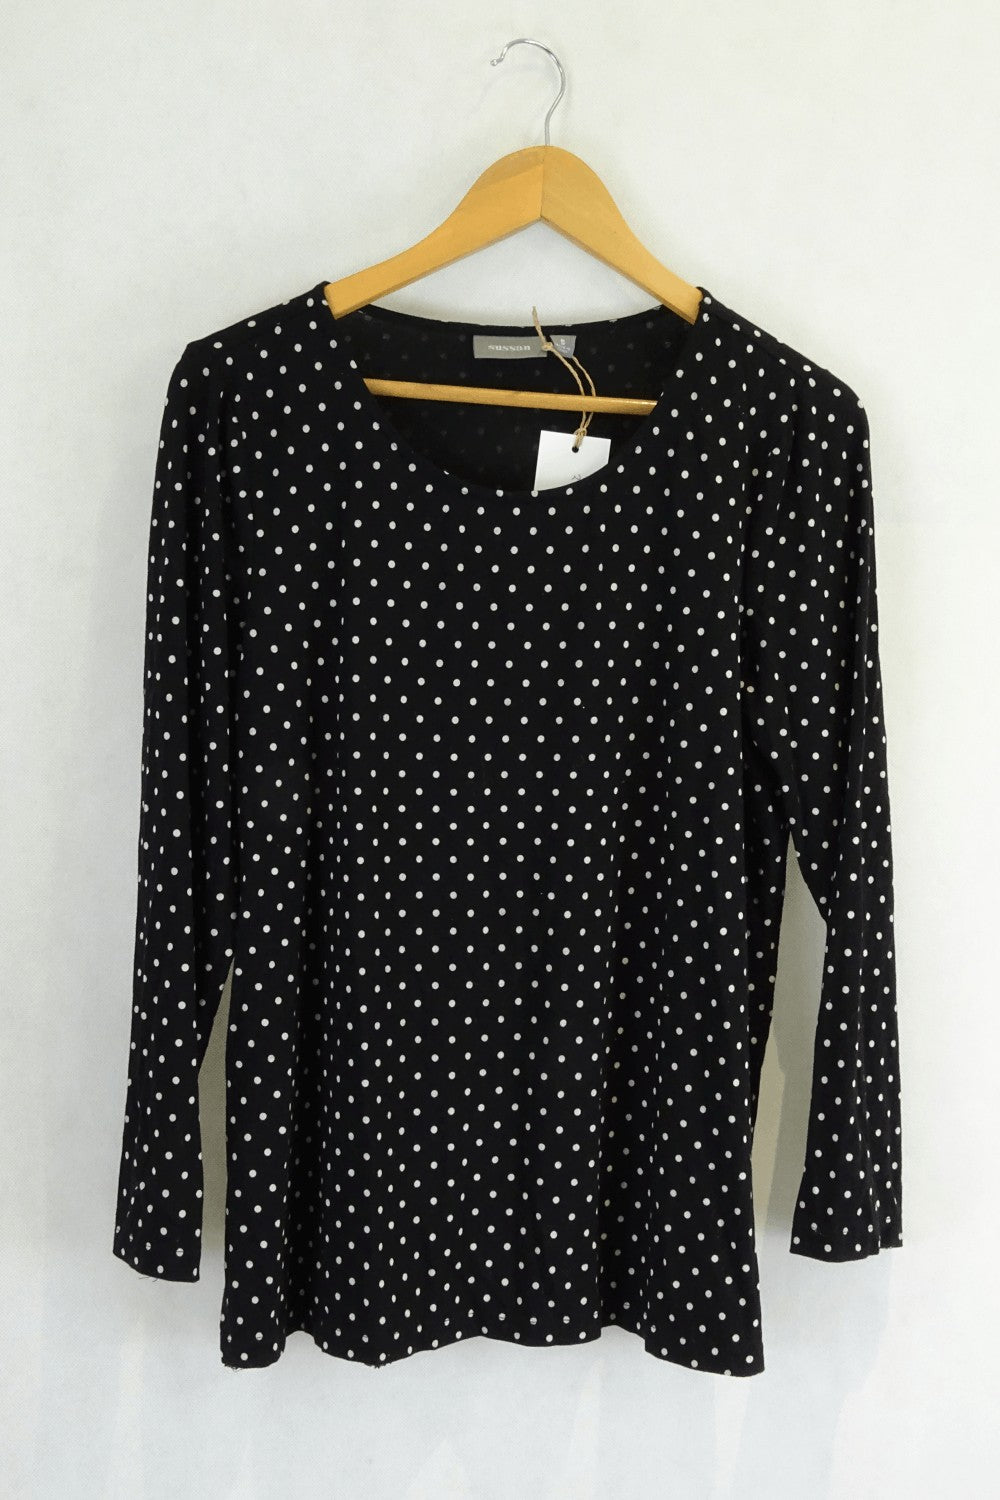 Sussan Black And White Spot Shirt S